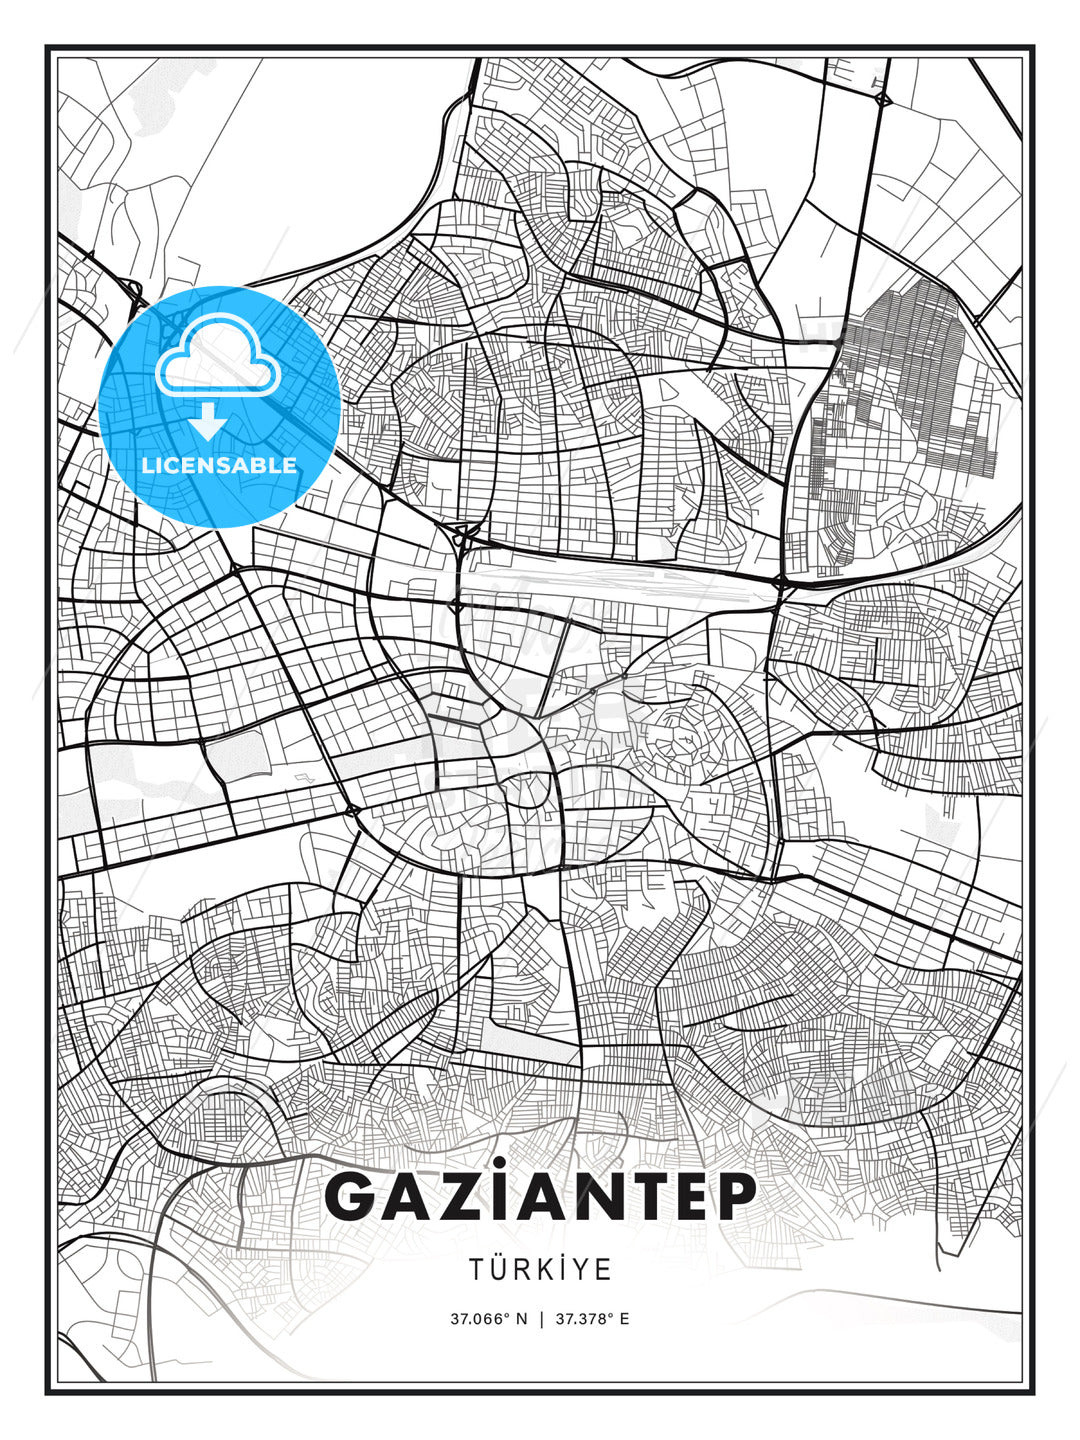 GAZİANTEP / Gaziantep, Turkey, Modern Print Template in Various Formats - HEBSTREITS Sketches